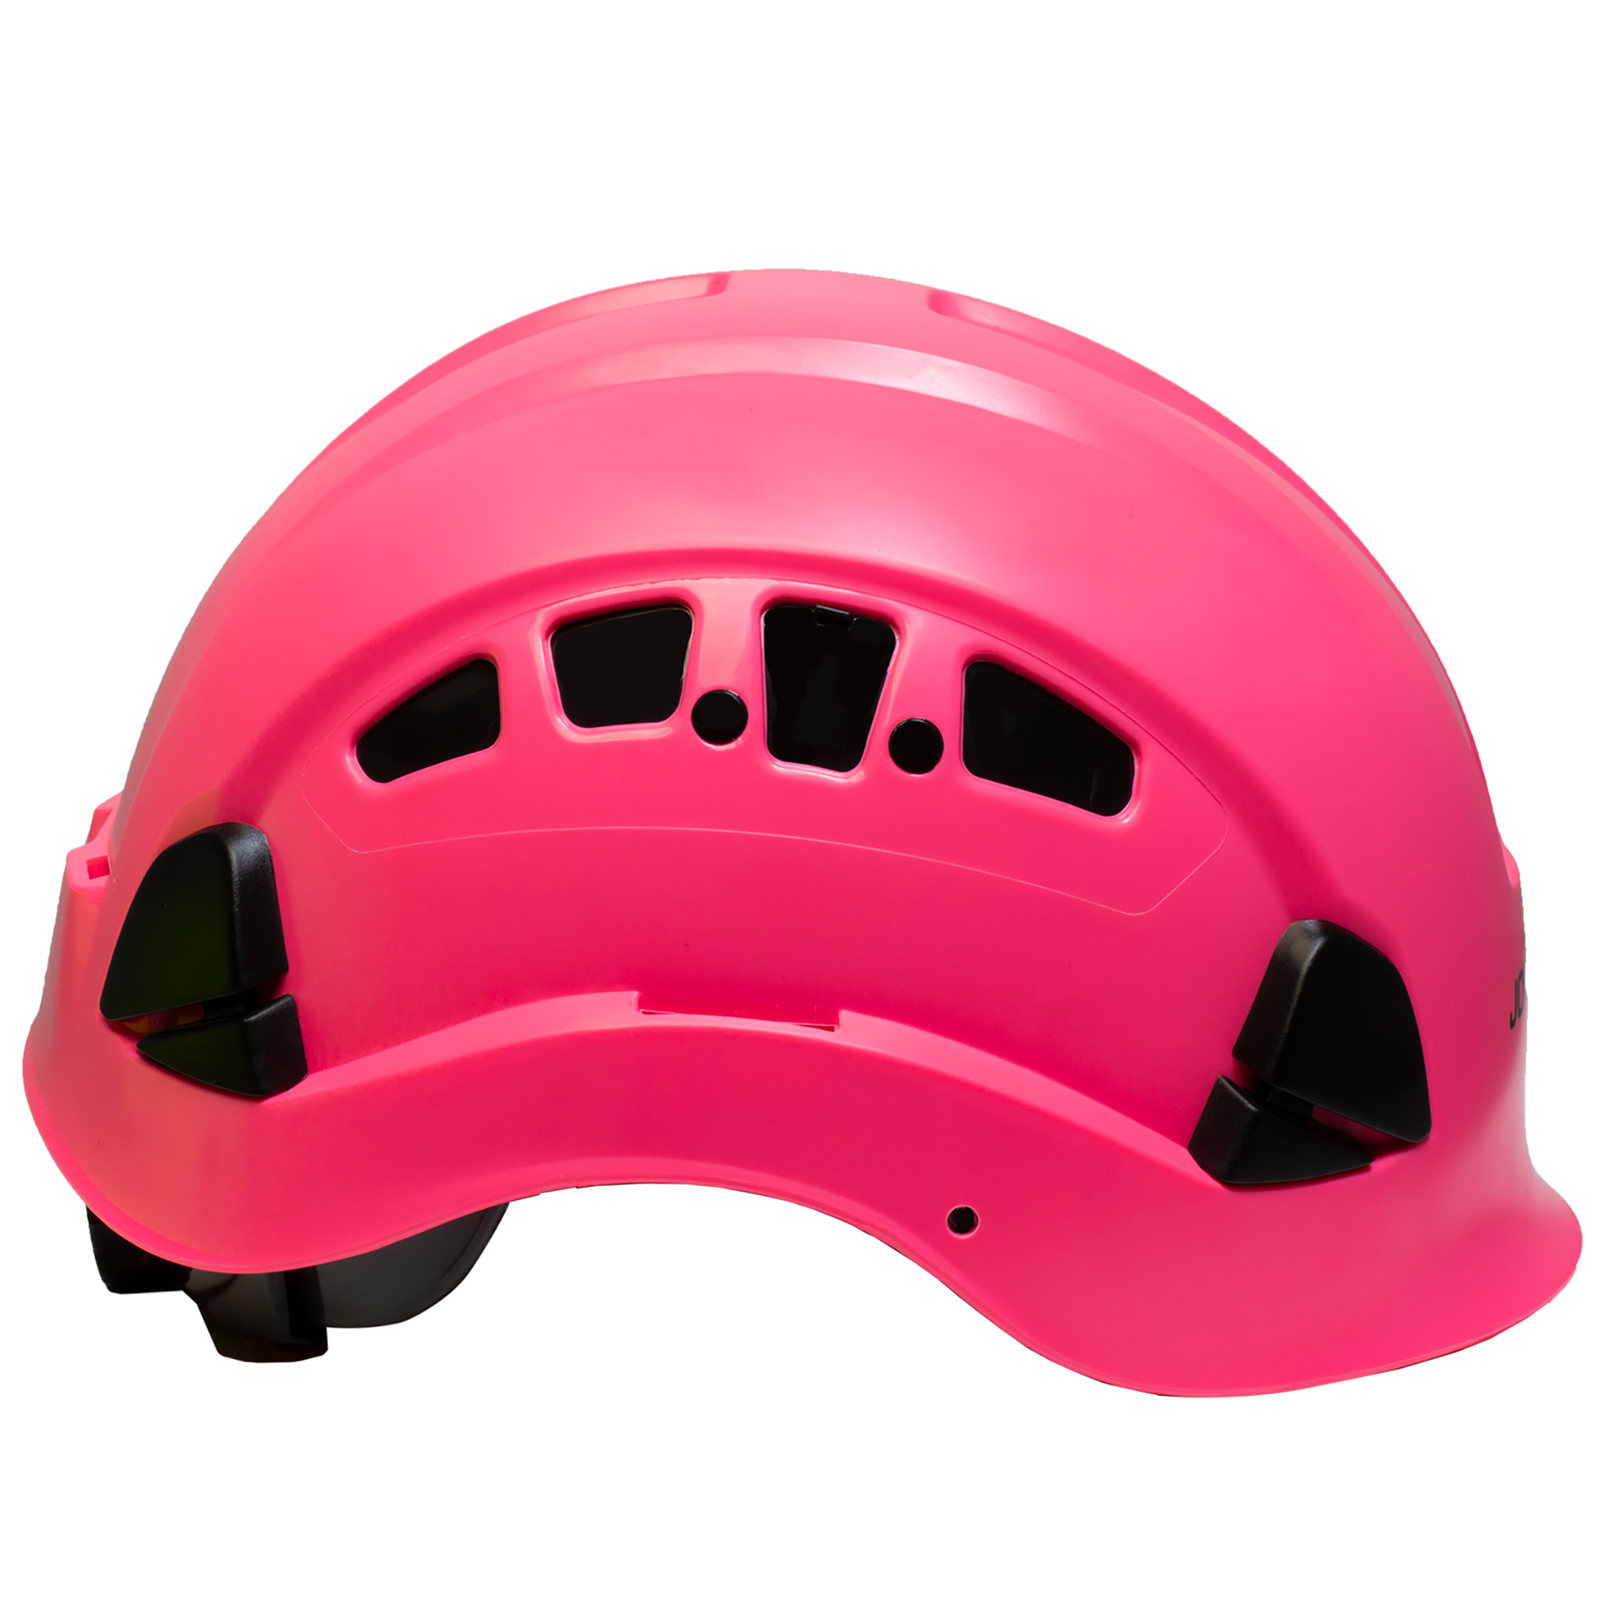 Rescue ABS hard hat with cooling vents, 6 point suspension, wheel ratchet adjustment and chin strap for head protection.